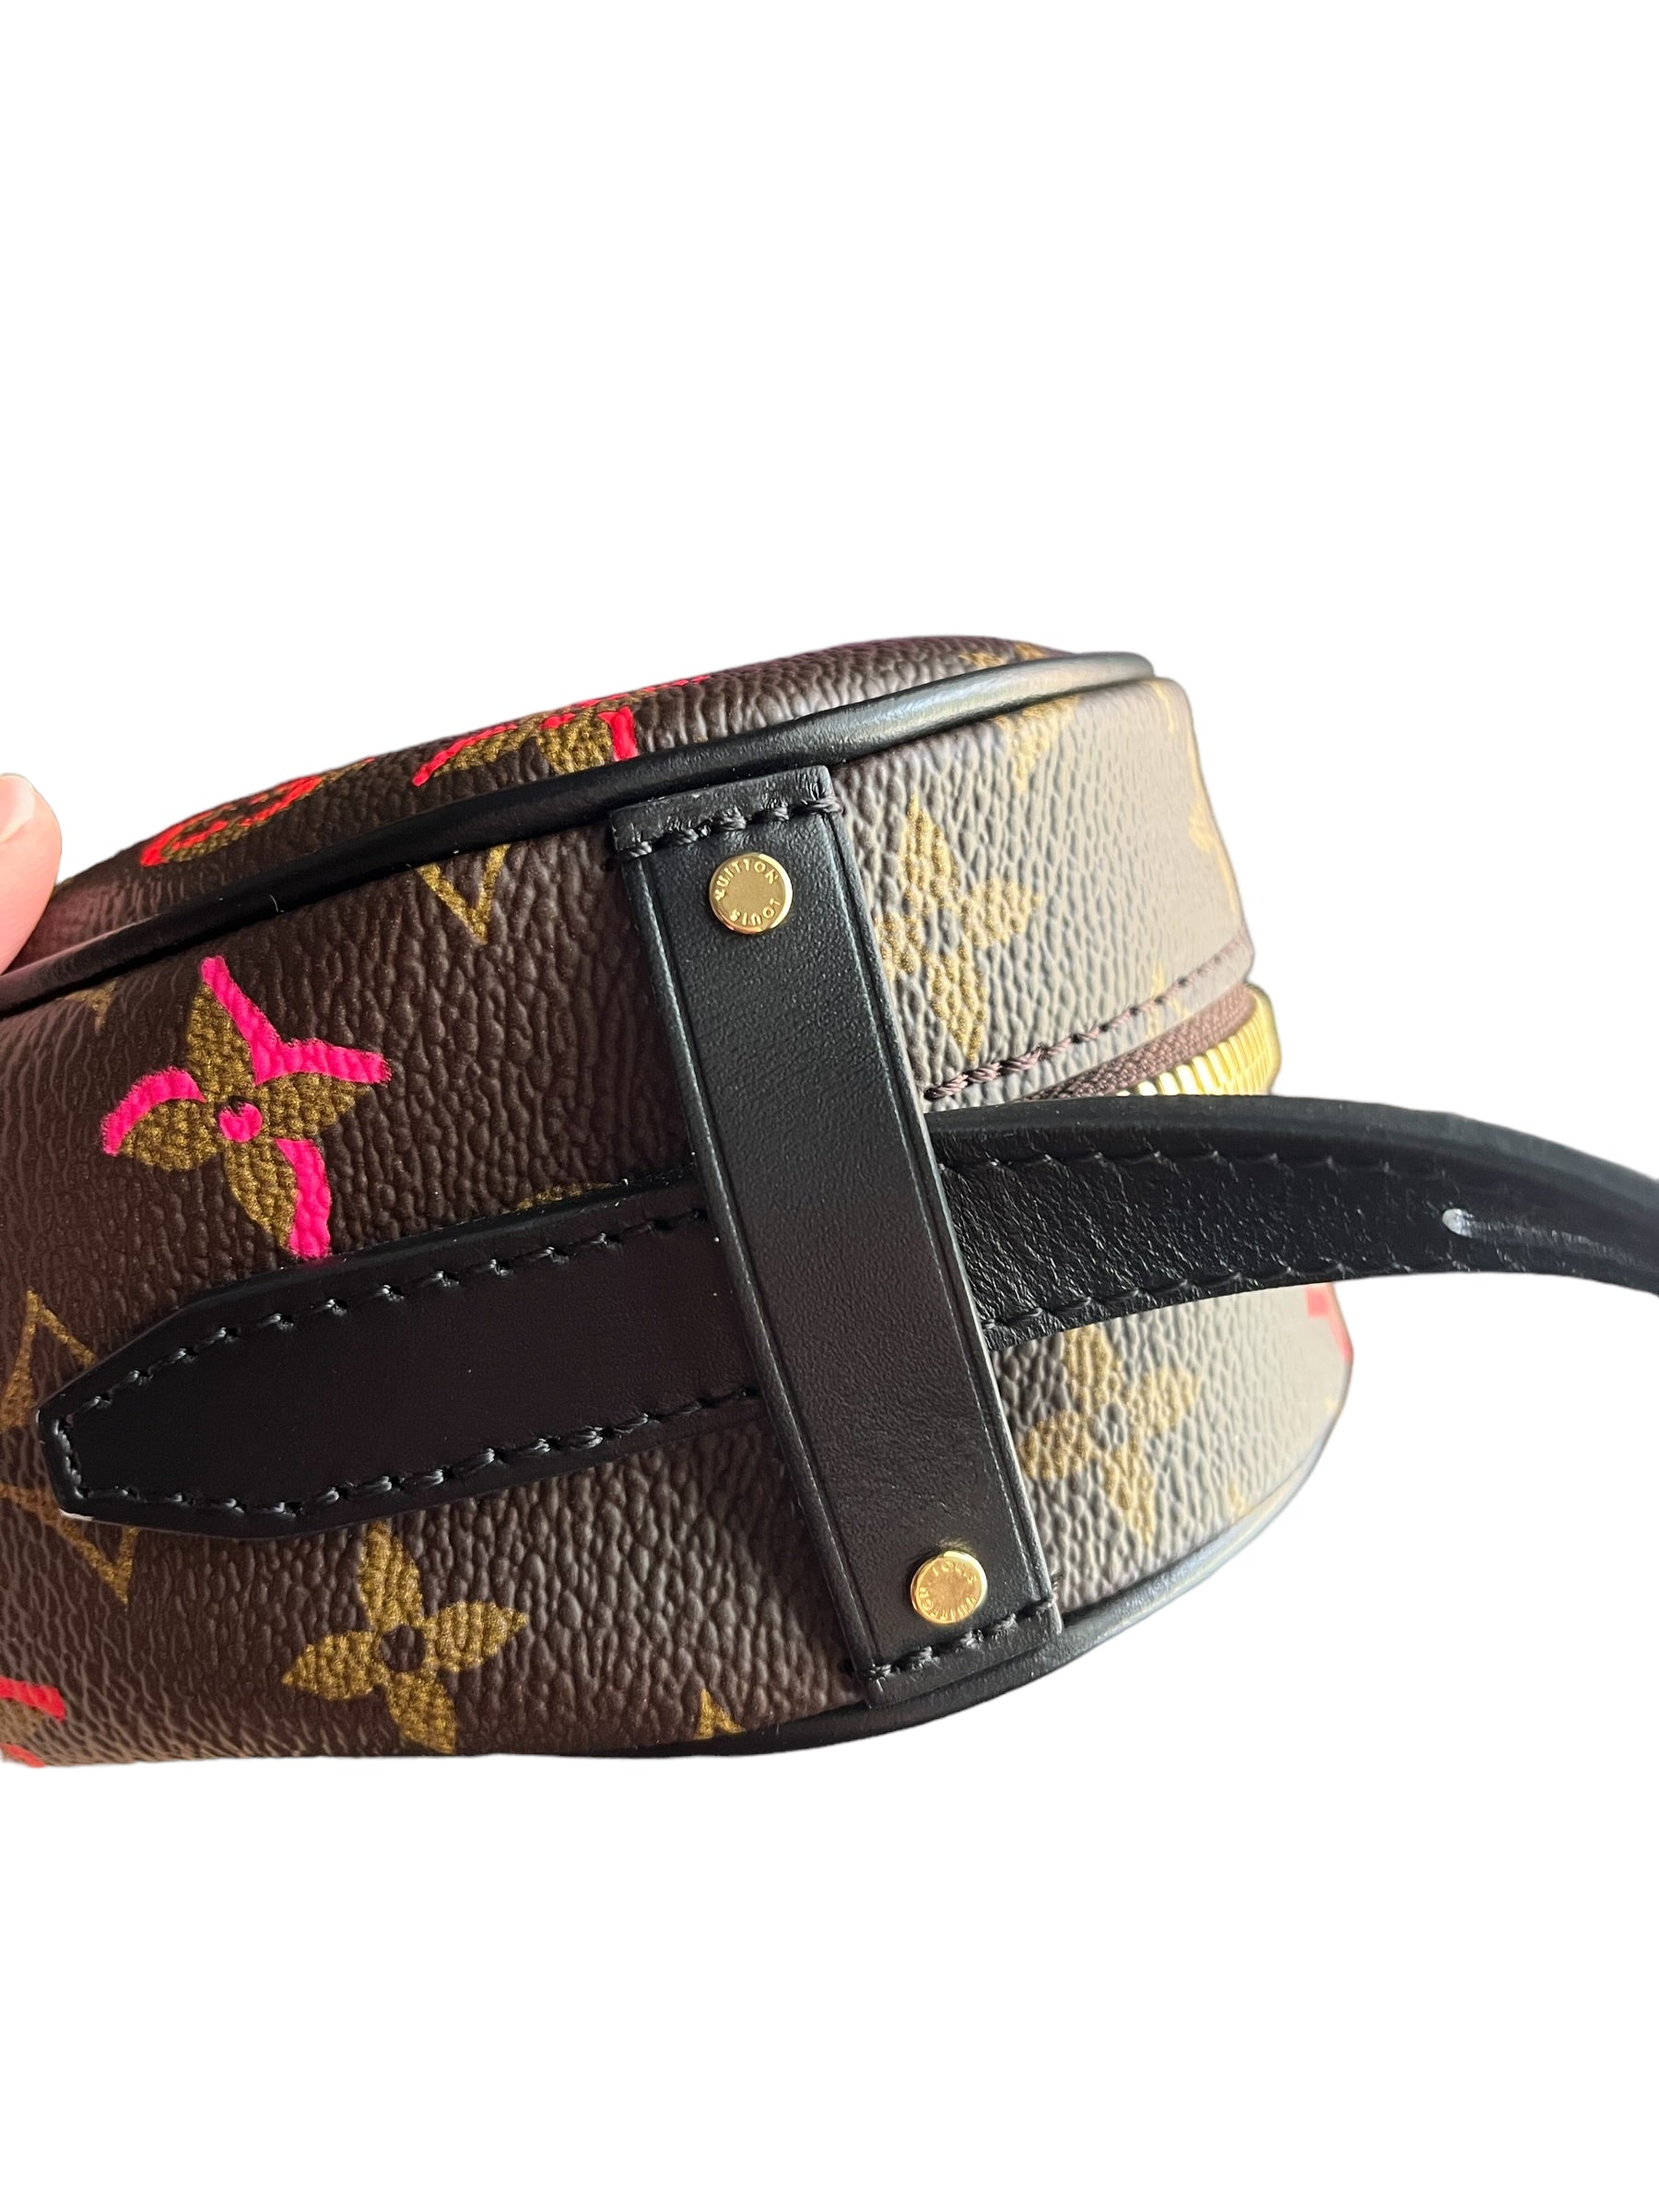 Louis Vuitton 2021 Limited Edition Heart Bag – Its A Luv Story